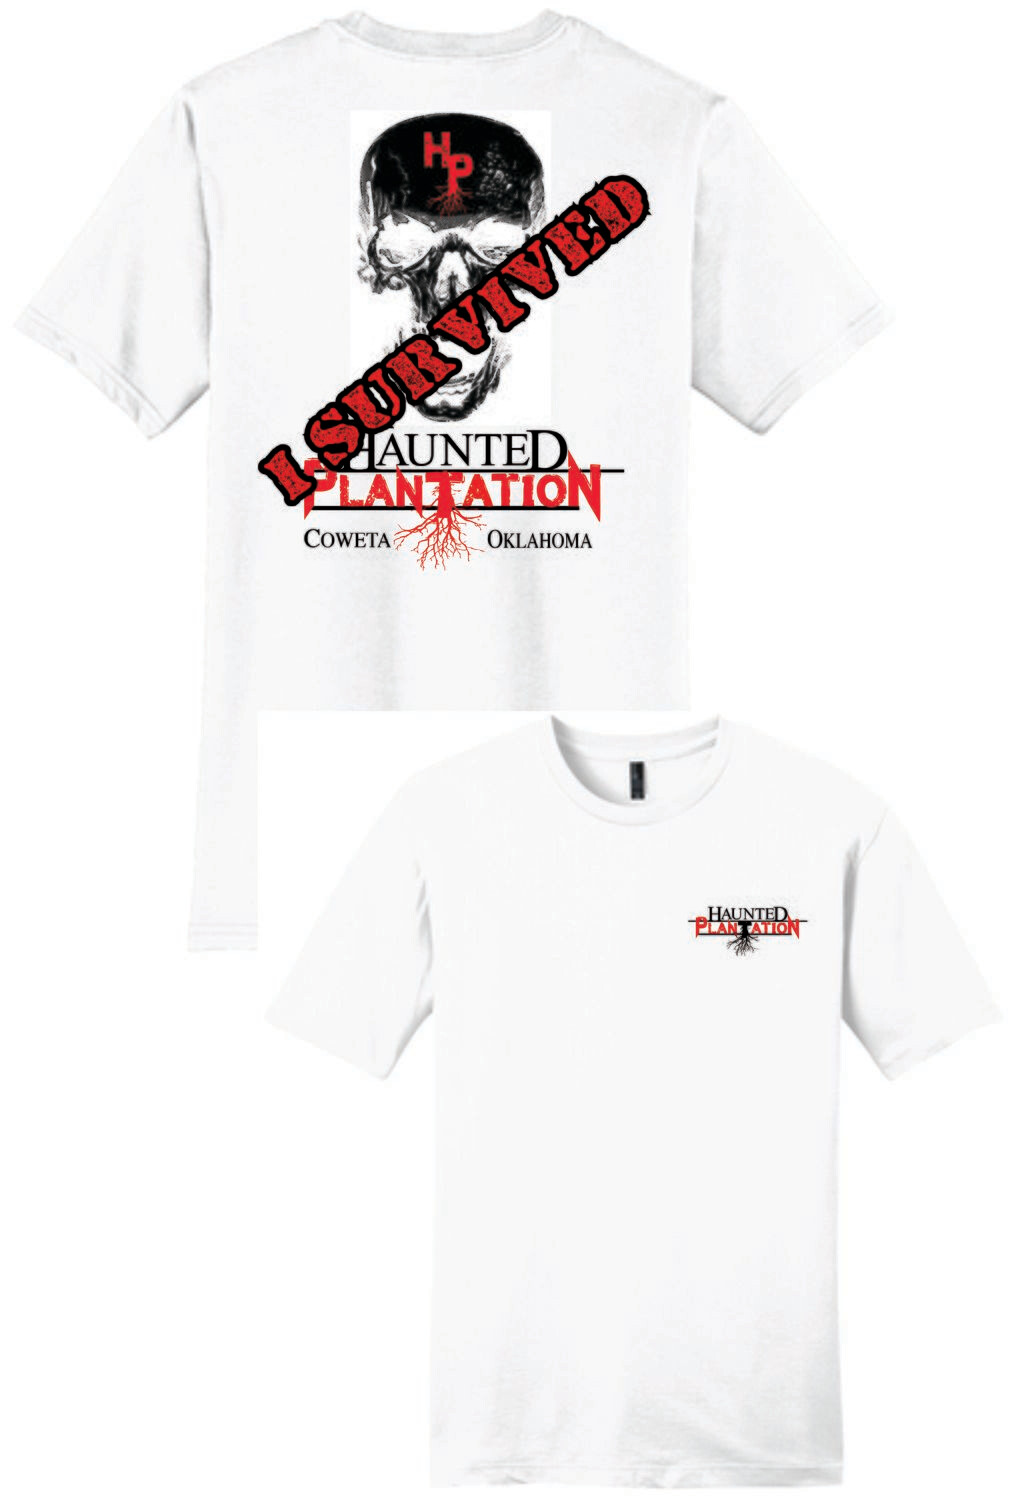 HAUNTED PLANTATION ~
DT6000 - District ® Very Important TEE ®